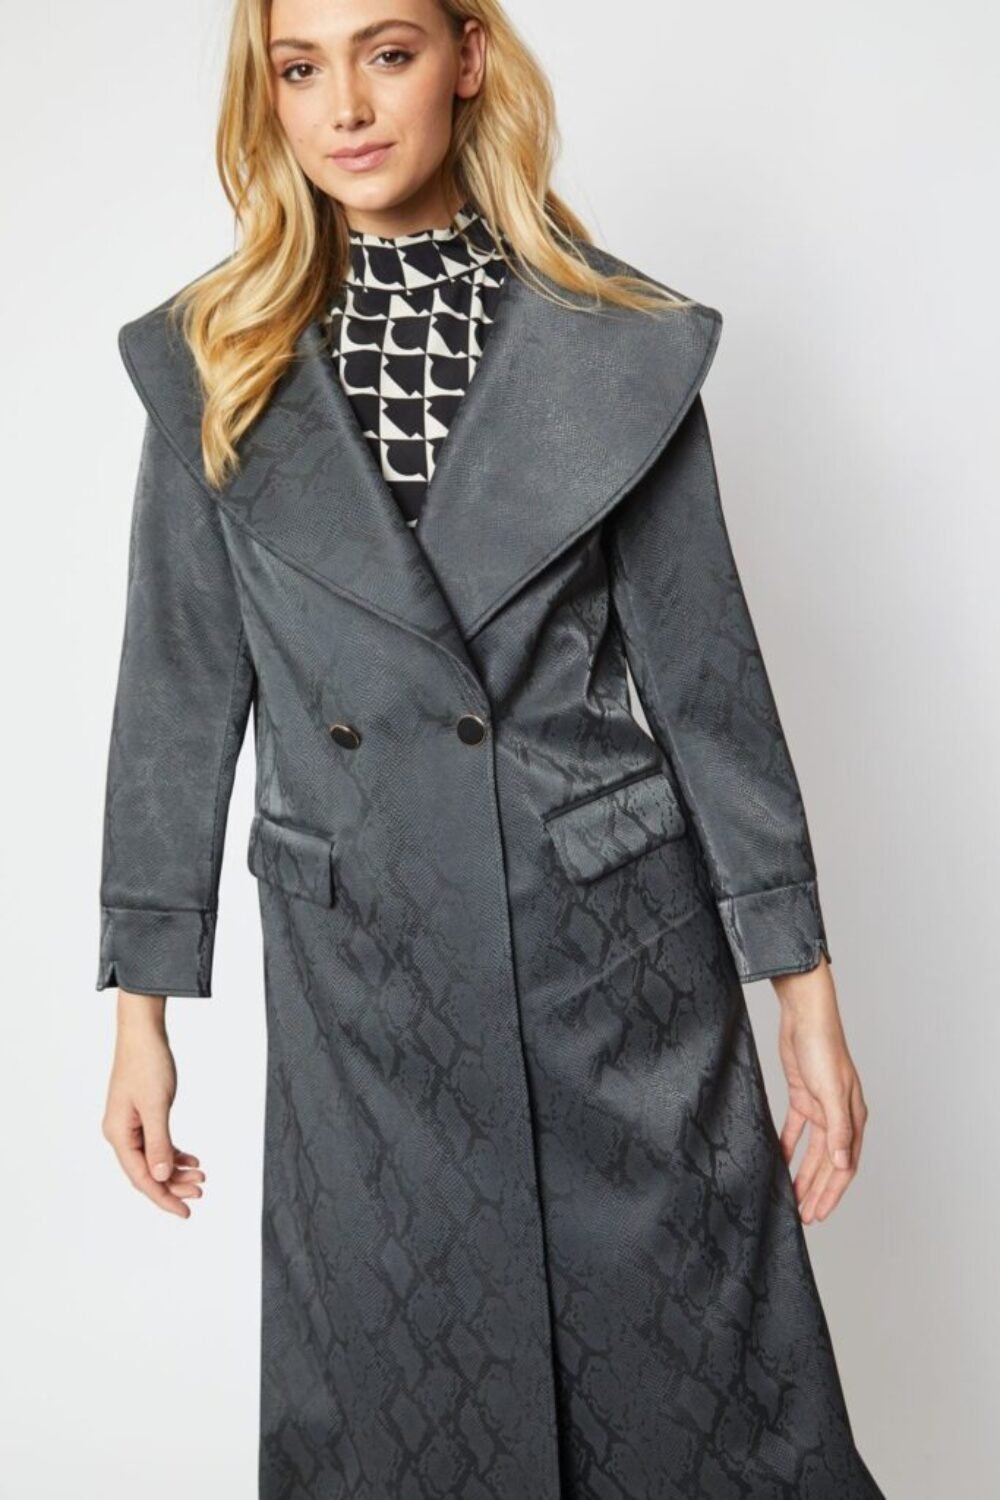 Shop Lux Black Trench Style Faux Suede Maxi Coat and women's luxury and designer clothes at www.lux-apparel.co.uk